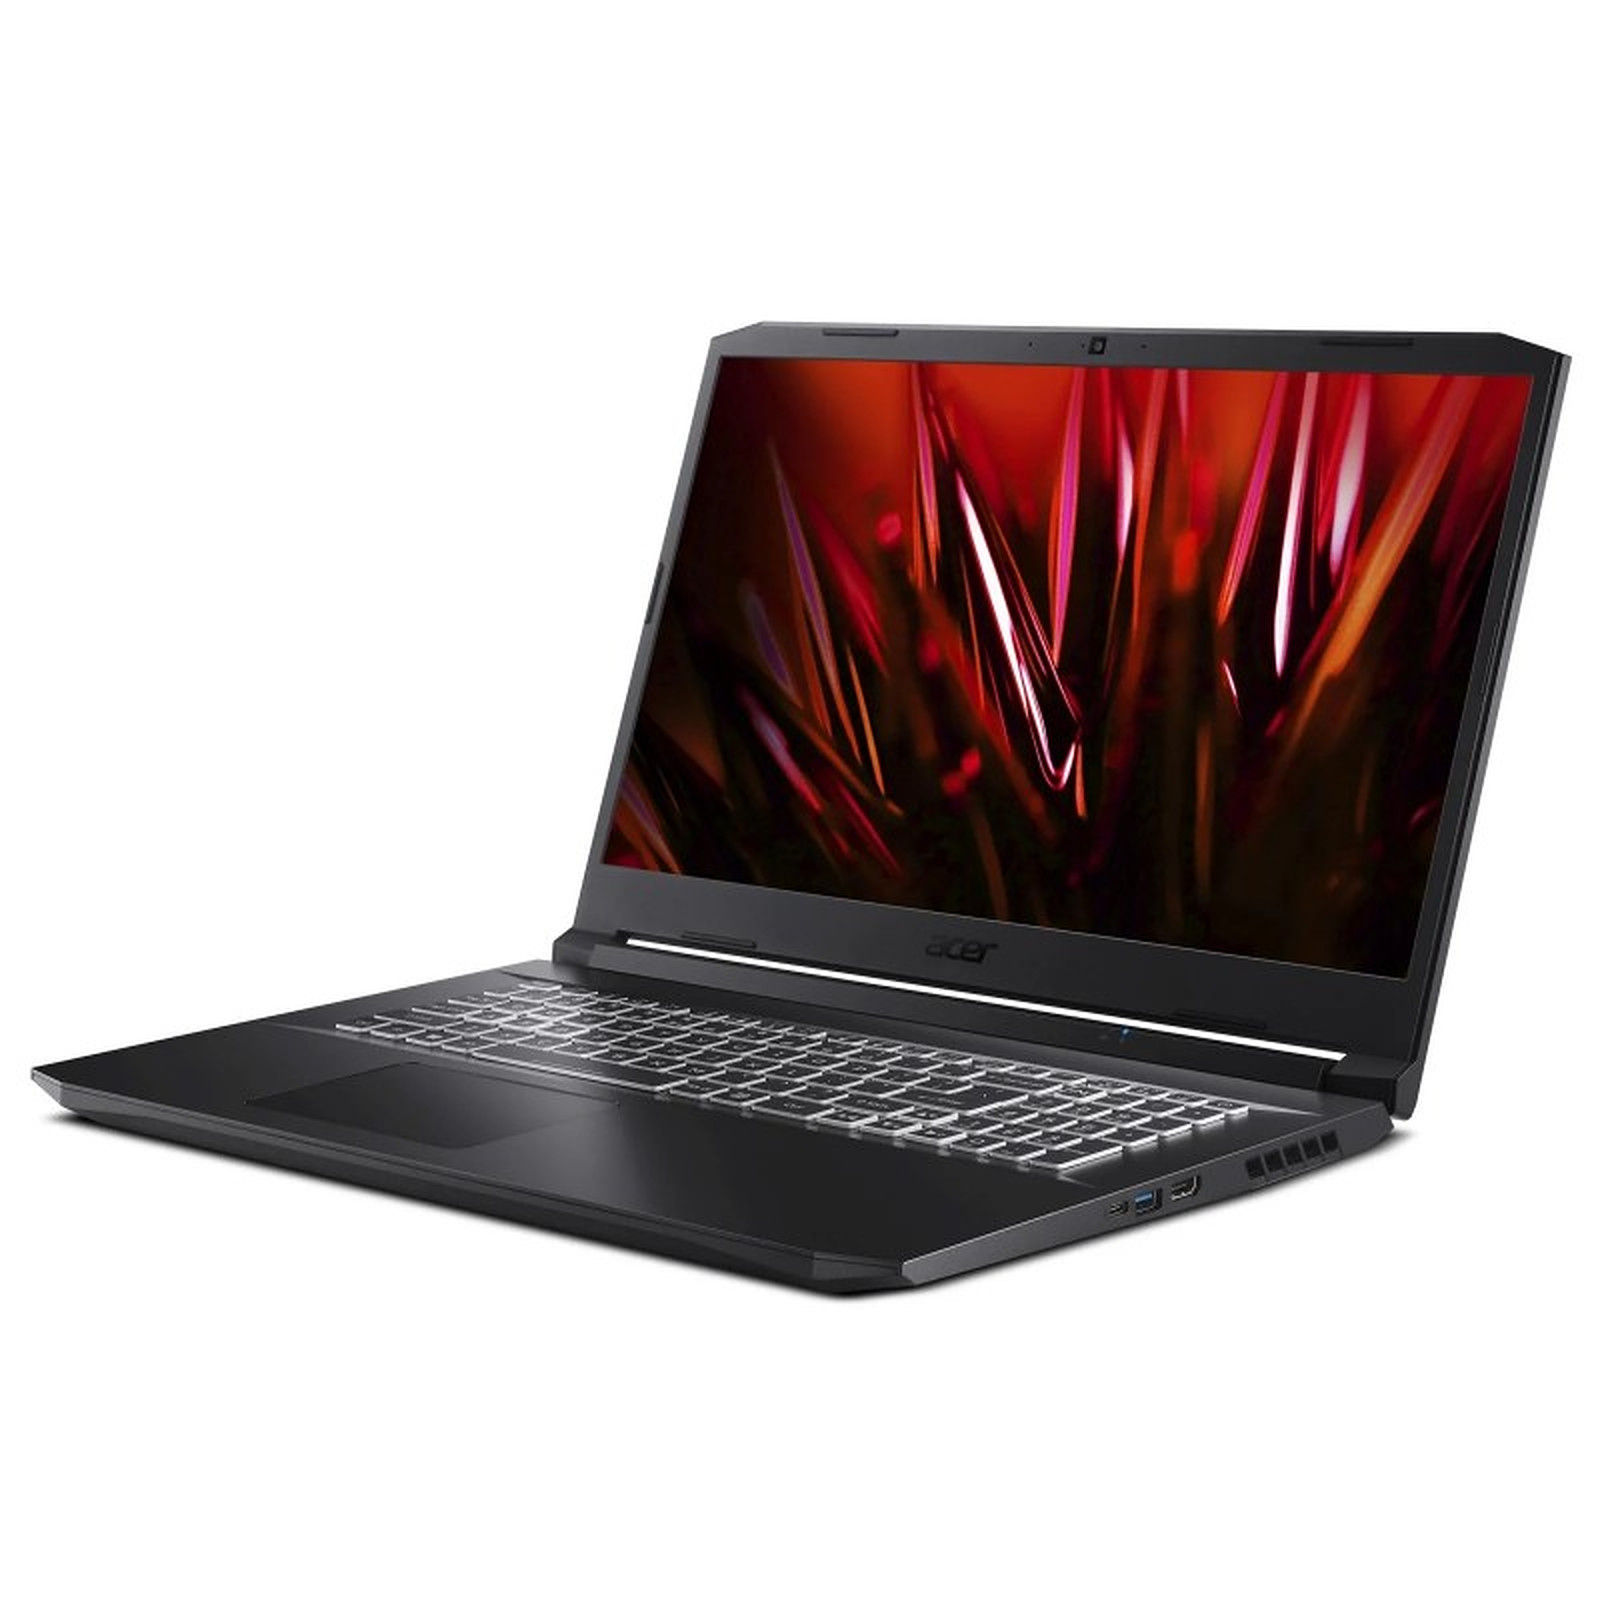 Acer Nitro 5 AN517-41-R01N (NH.QBHEF.001) · Reconditionne - PC portable reconditionne Acer